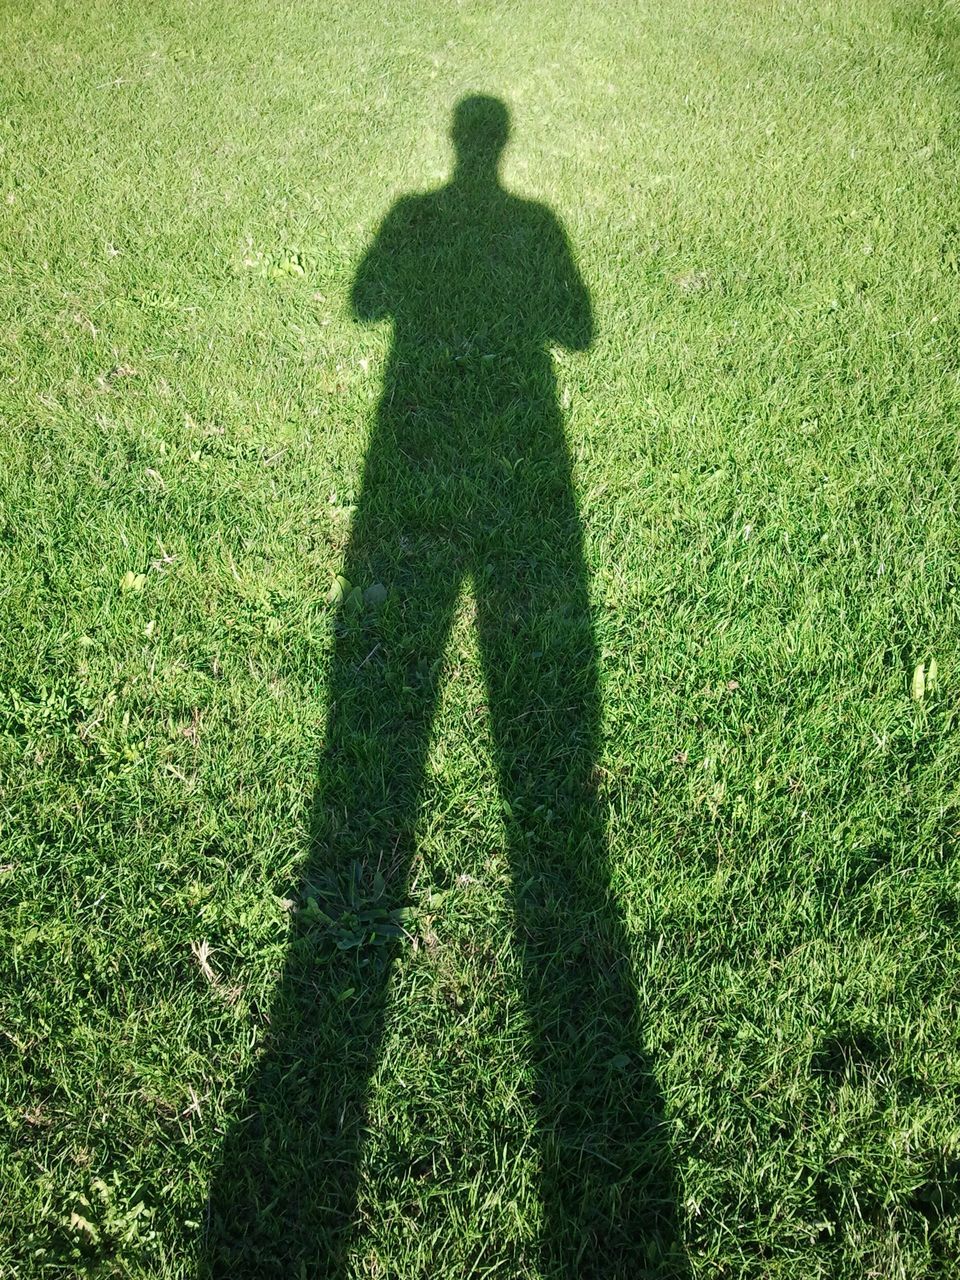 SHADOW ON GRASS